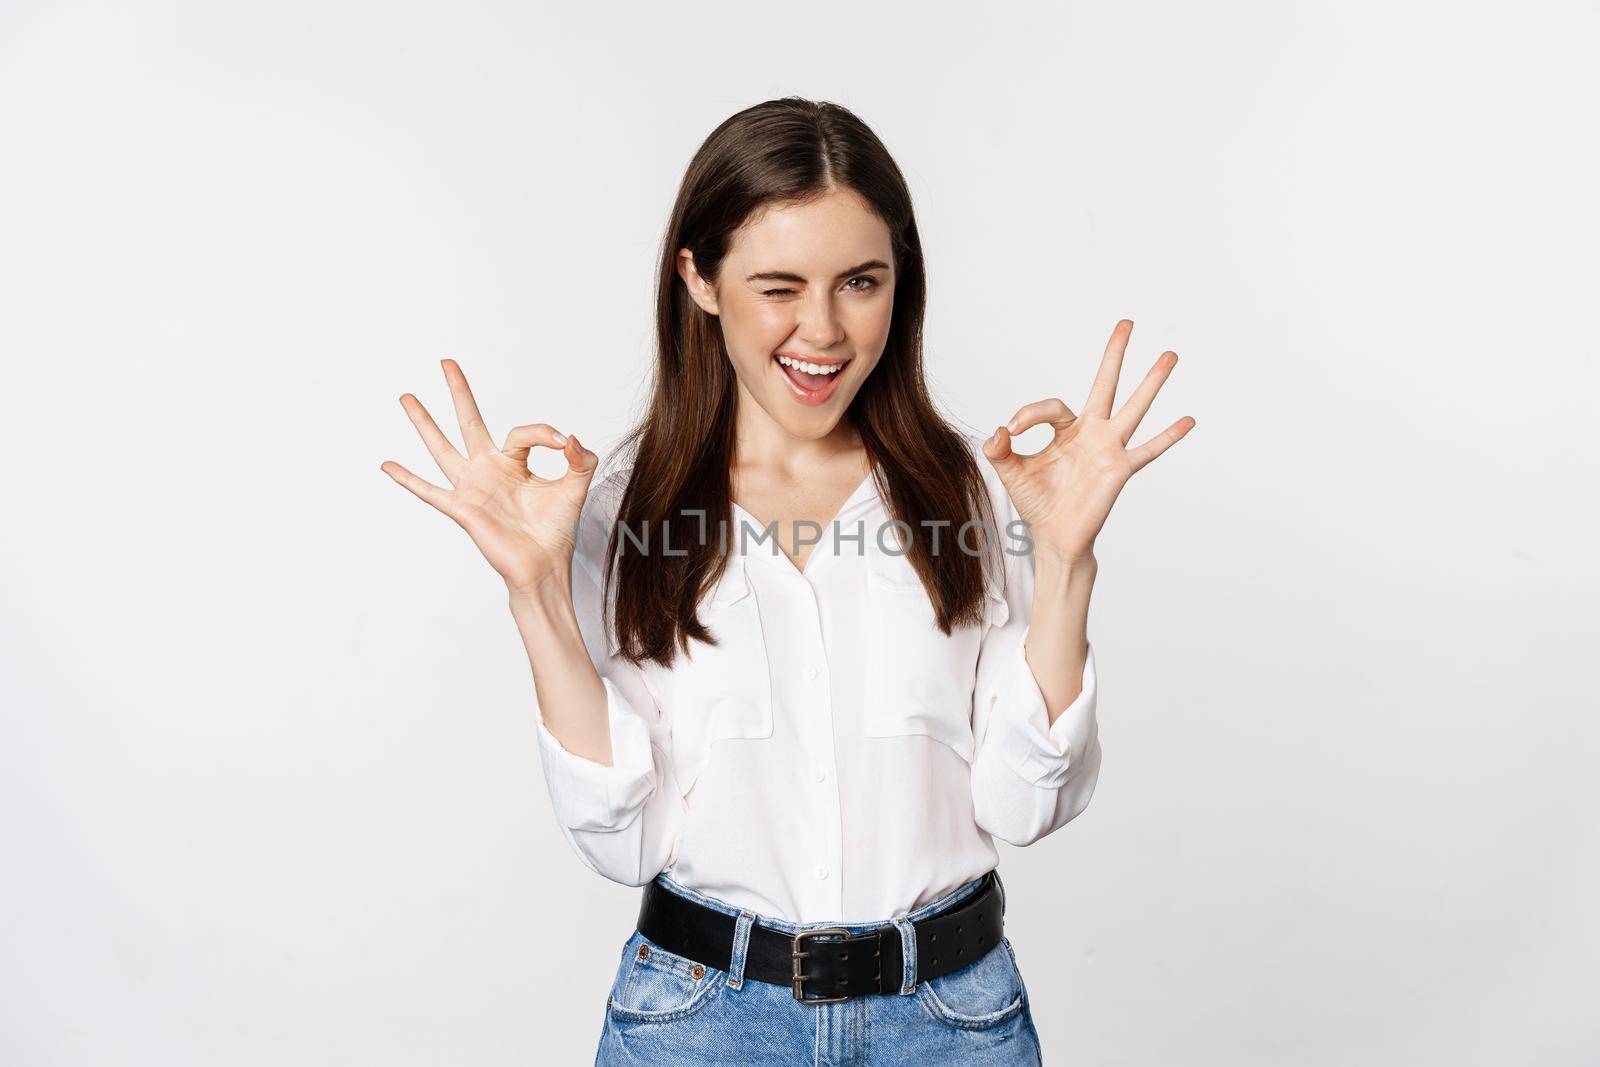 Smiling confident business woman, winking, showing okay ok sign, excellent, no problem gesture, standing over white background.